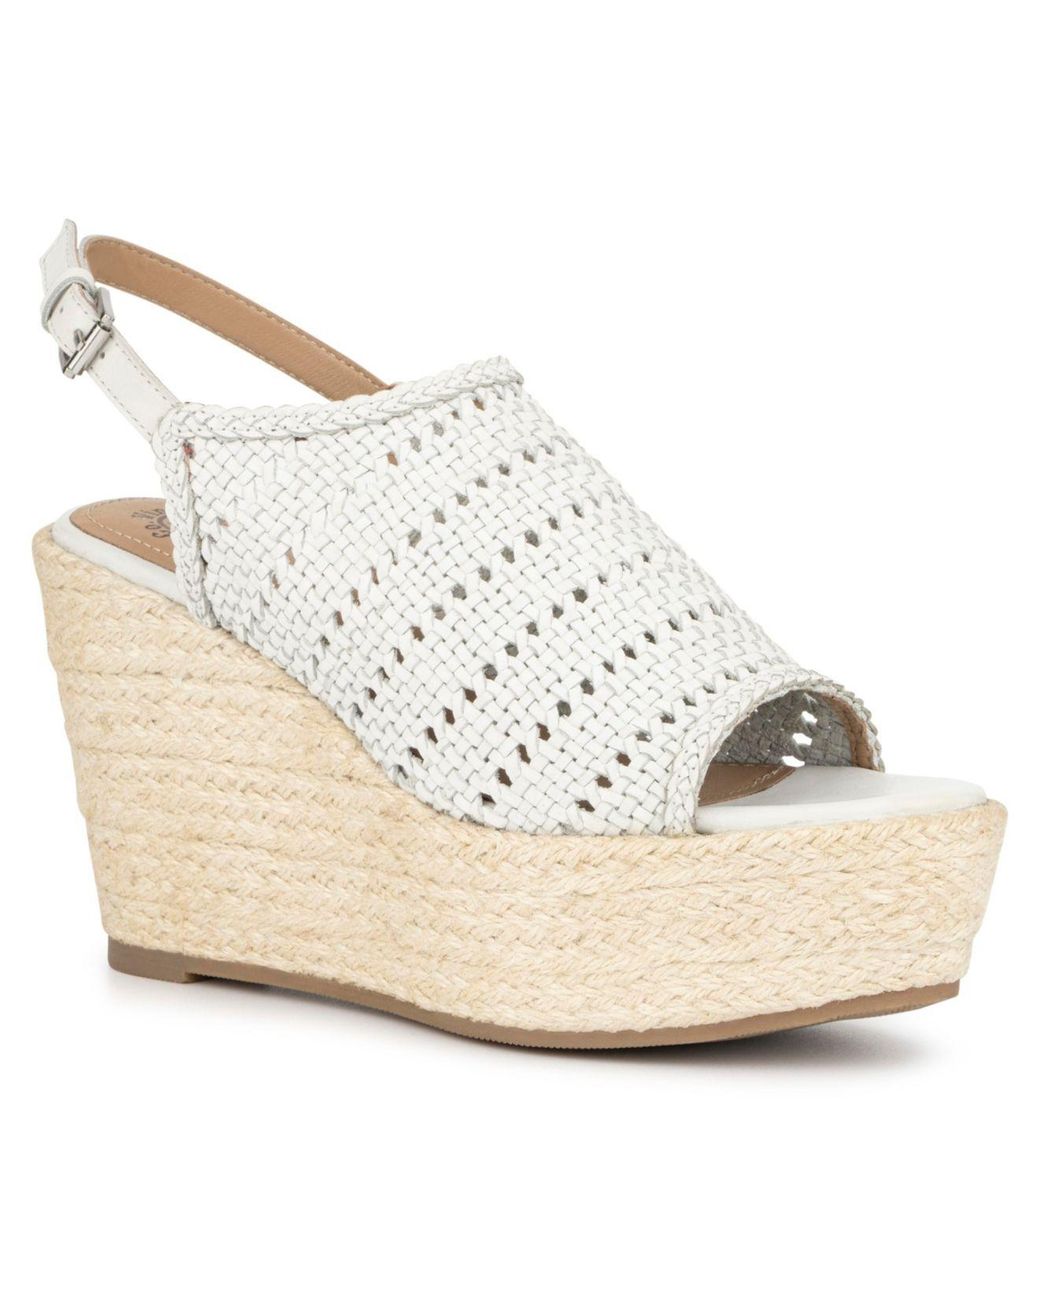 Vintage Foundry Co. Cynthia Wedge Sandal in White | Lyst